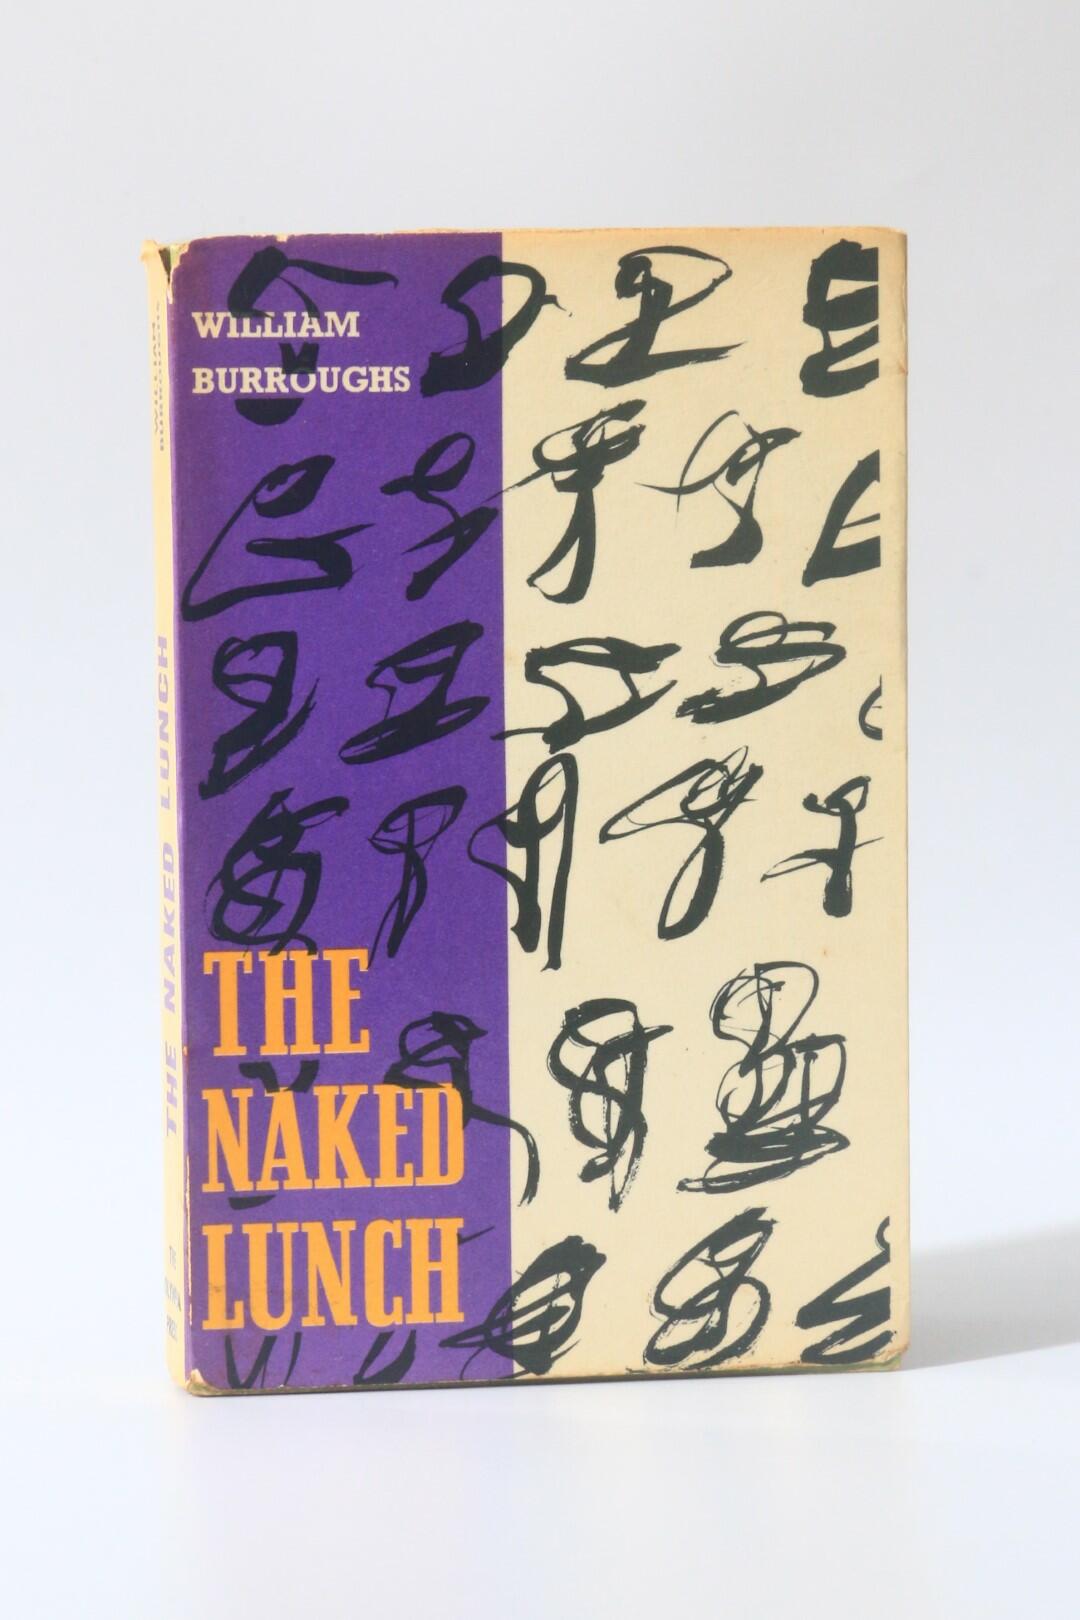 William S. Burroughs - The Naked Lunch - The Olympia Press, 1955, First Edition.